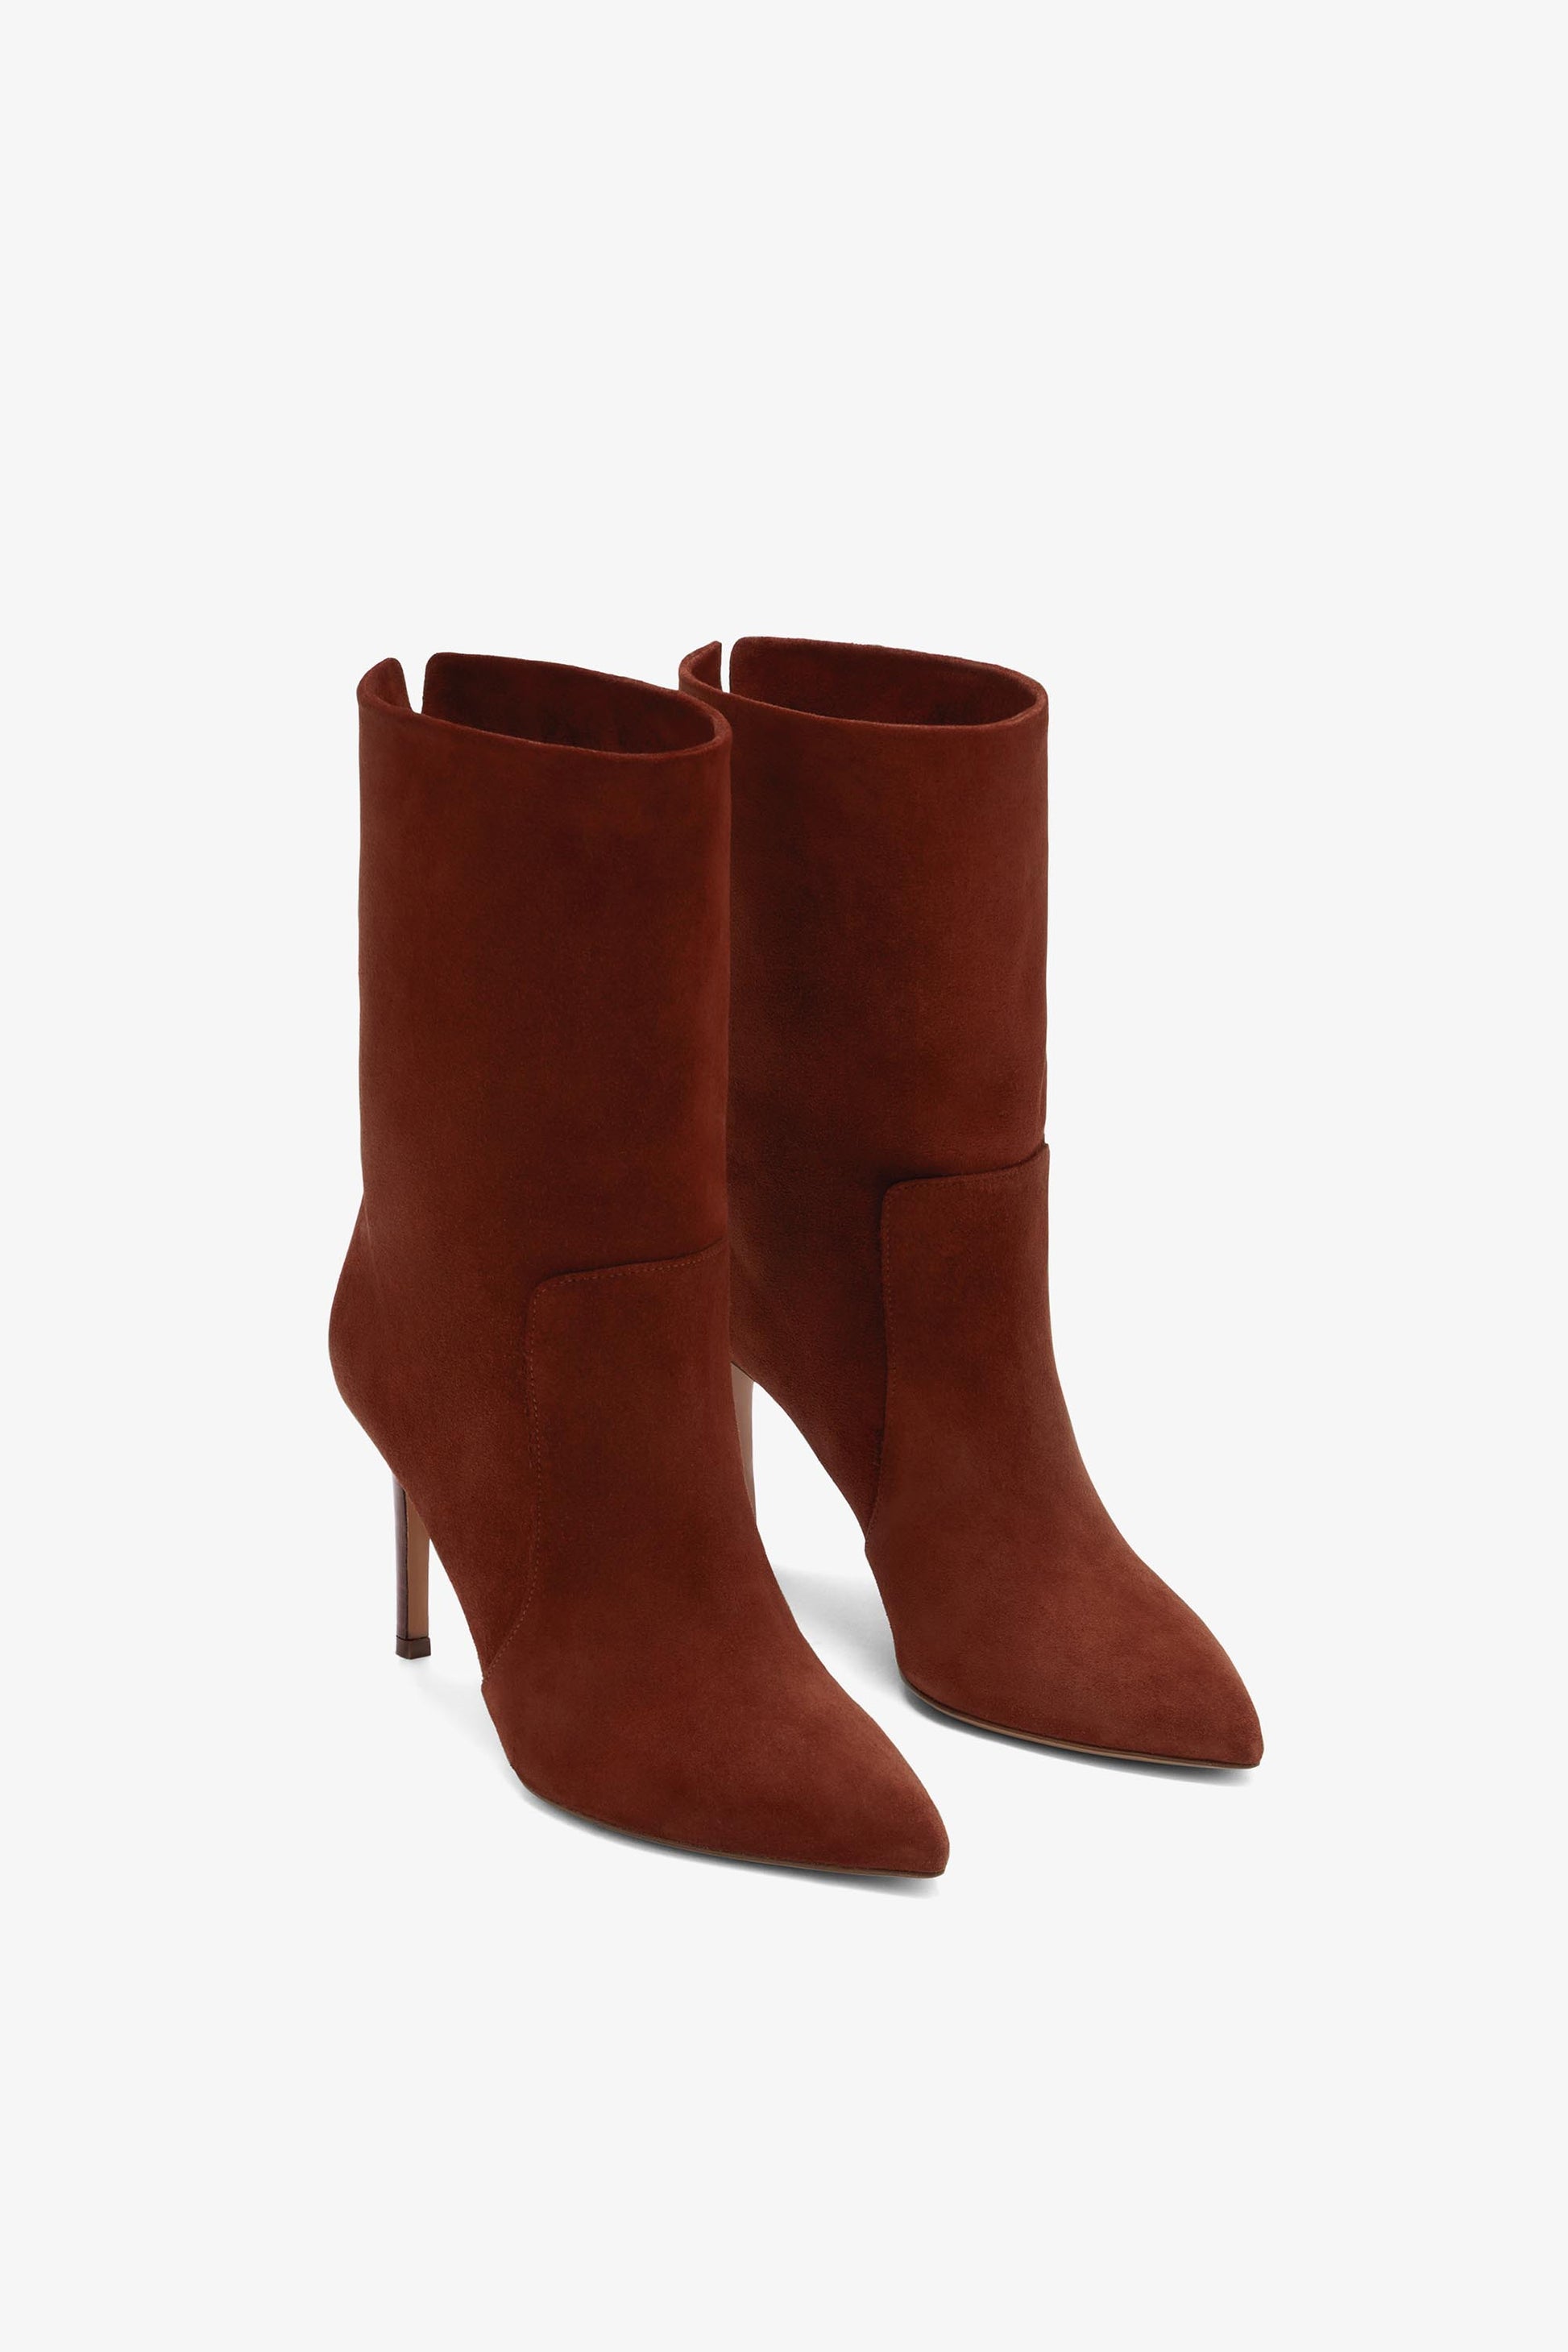 Rust suede ankle boot